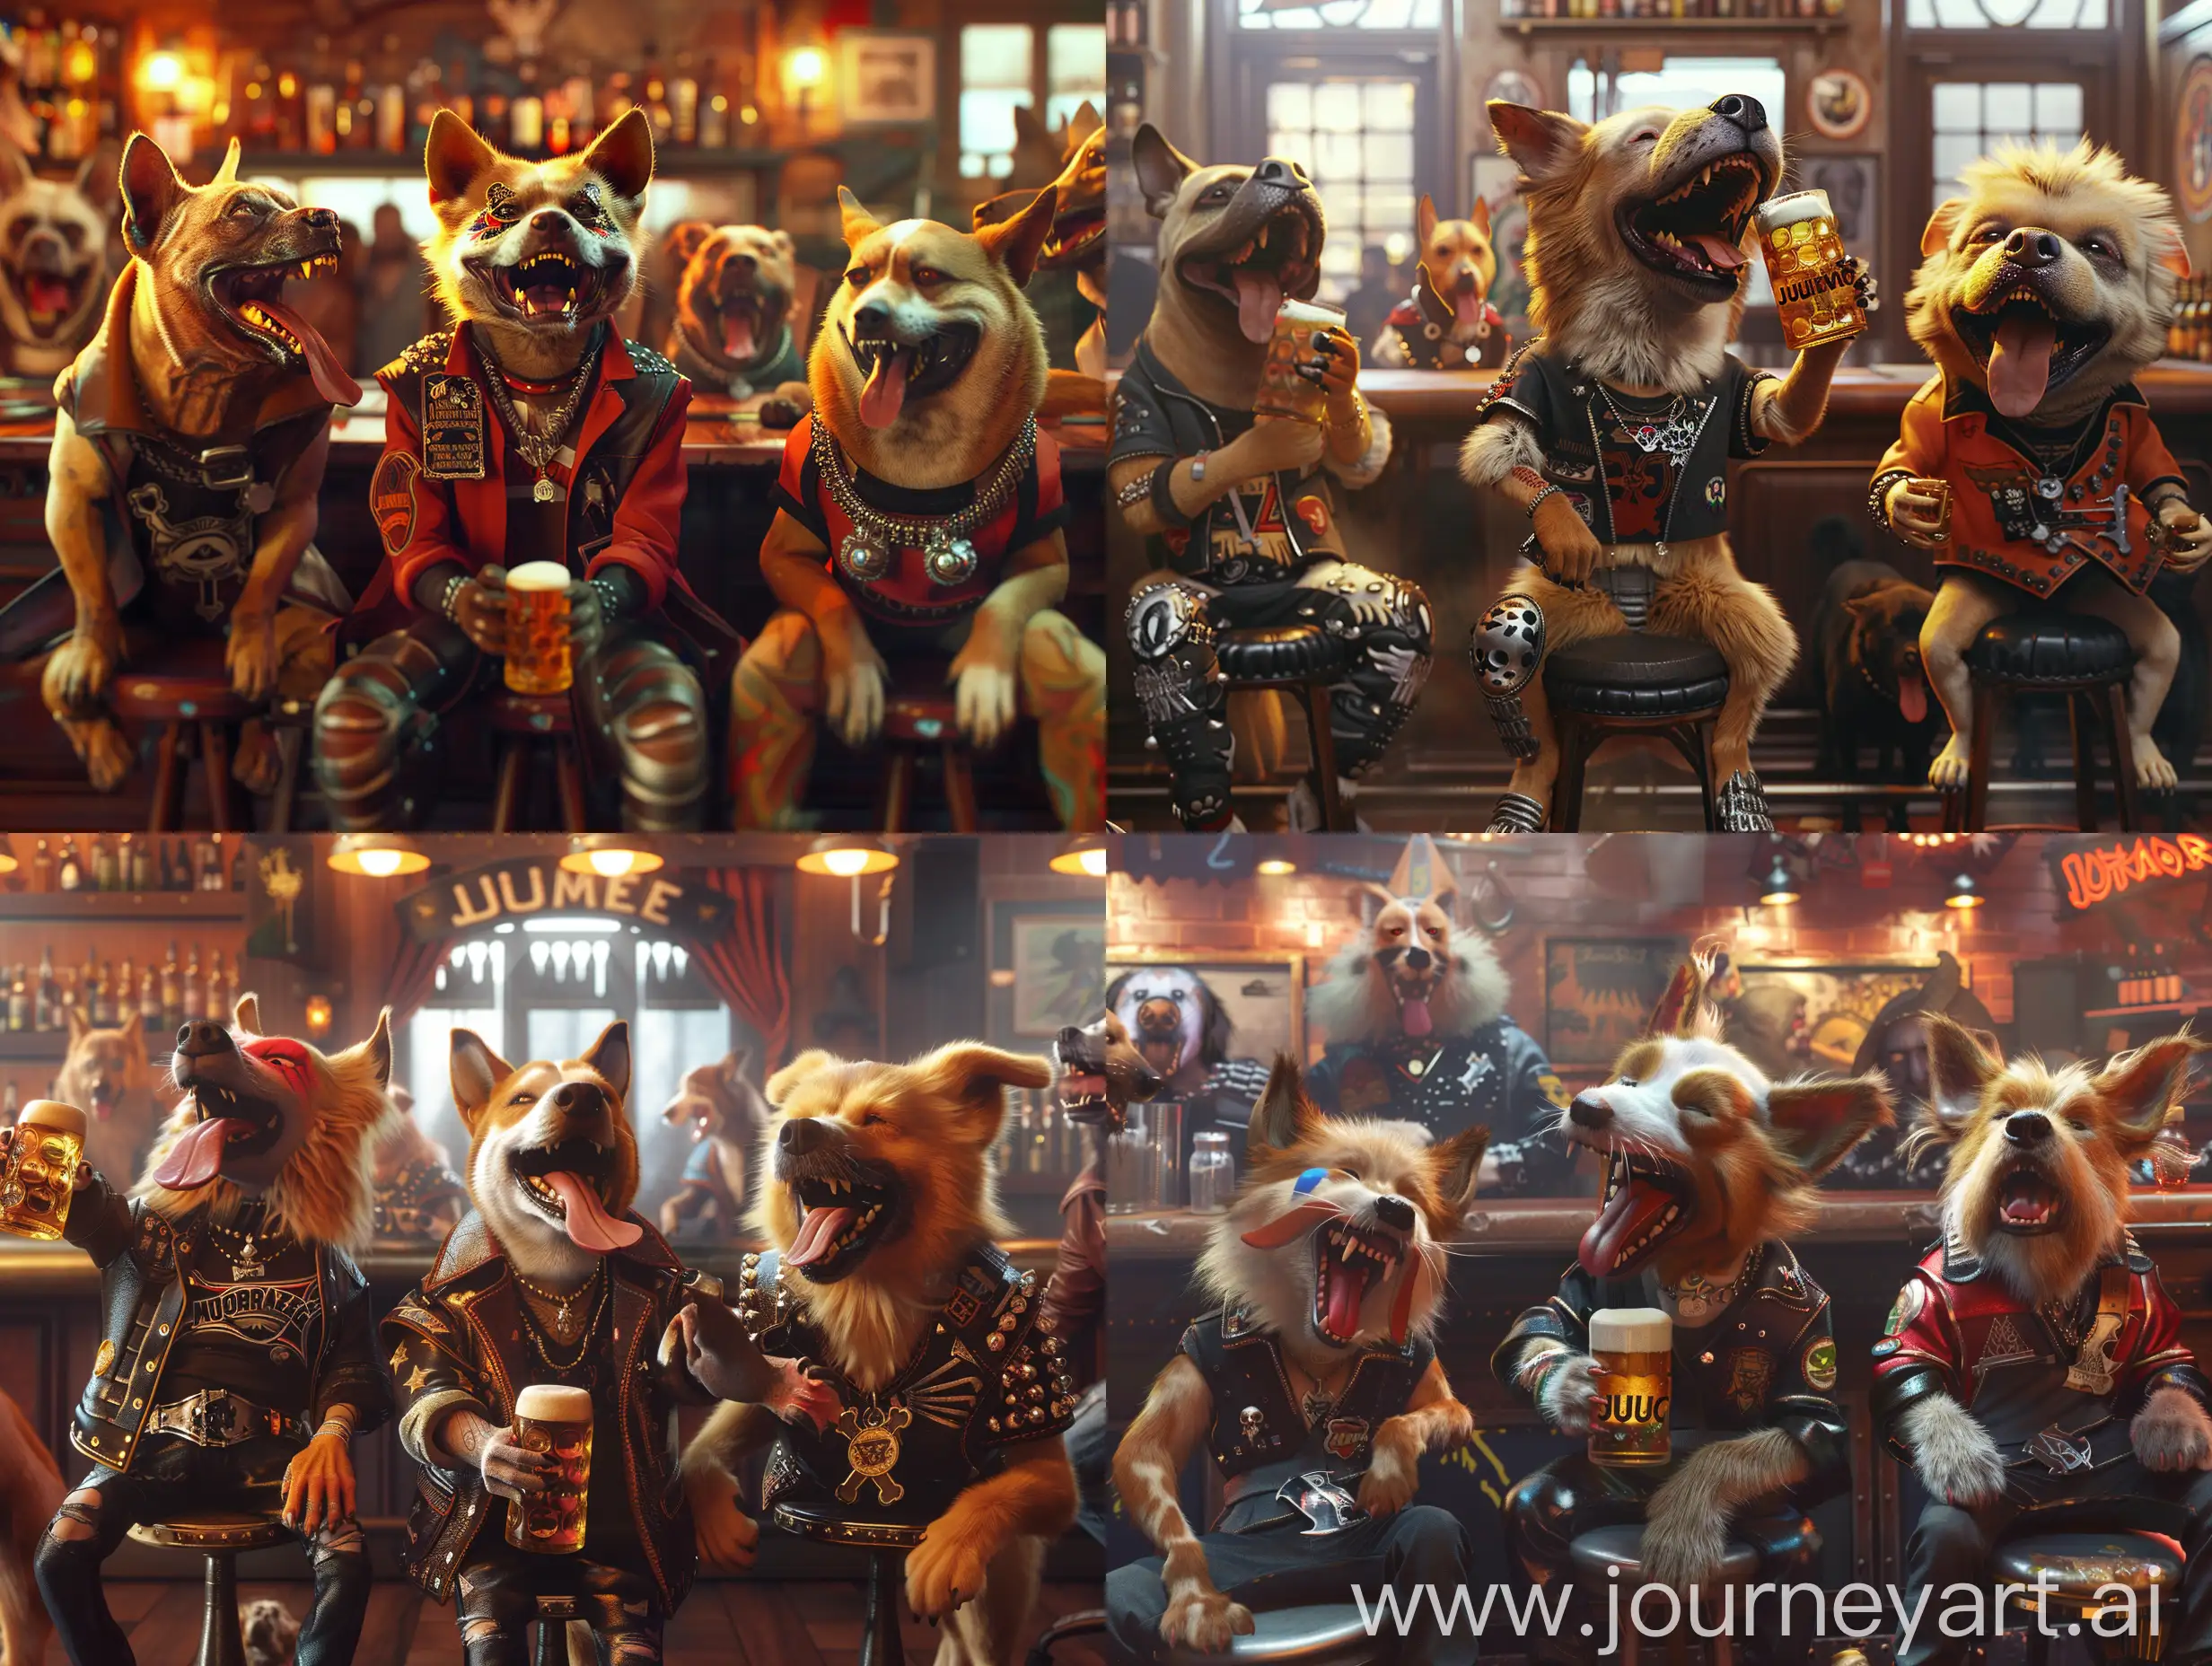 Three-Dogs-in-Heavy-Metal-Attire-Enjoying-Beers-at-a-Bar